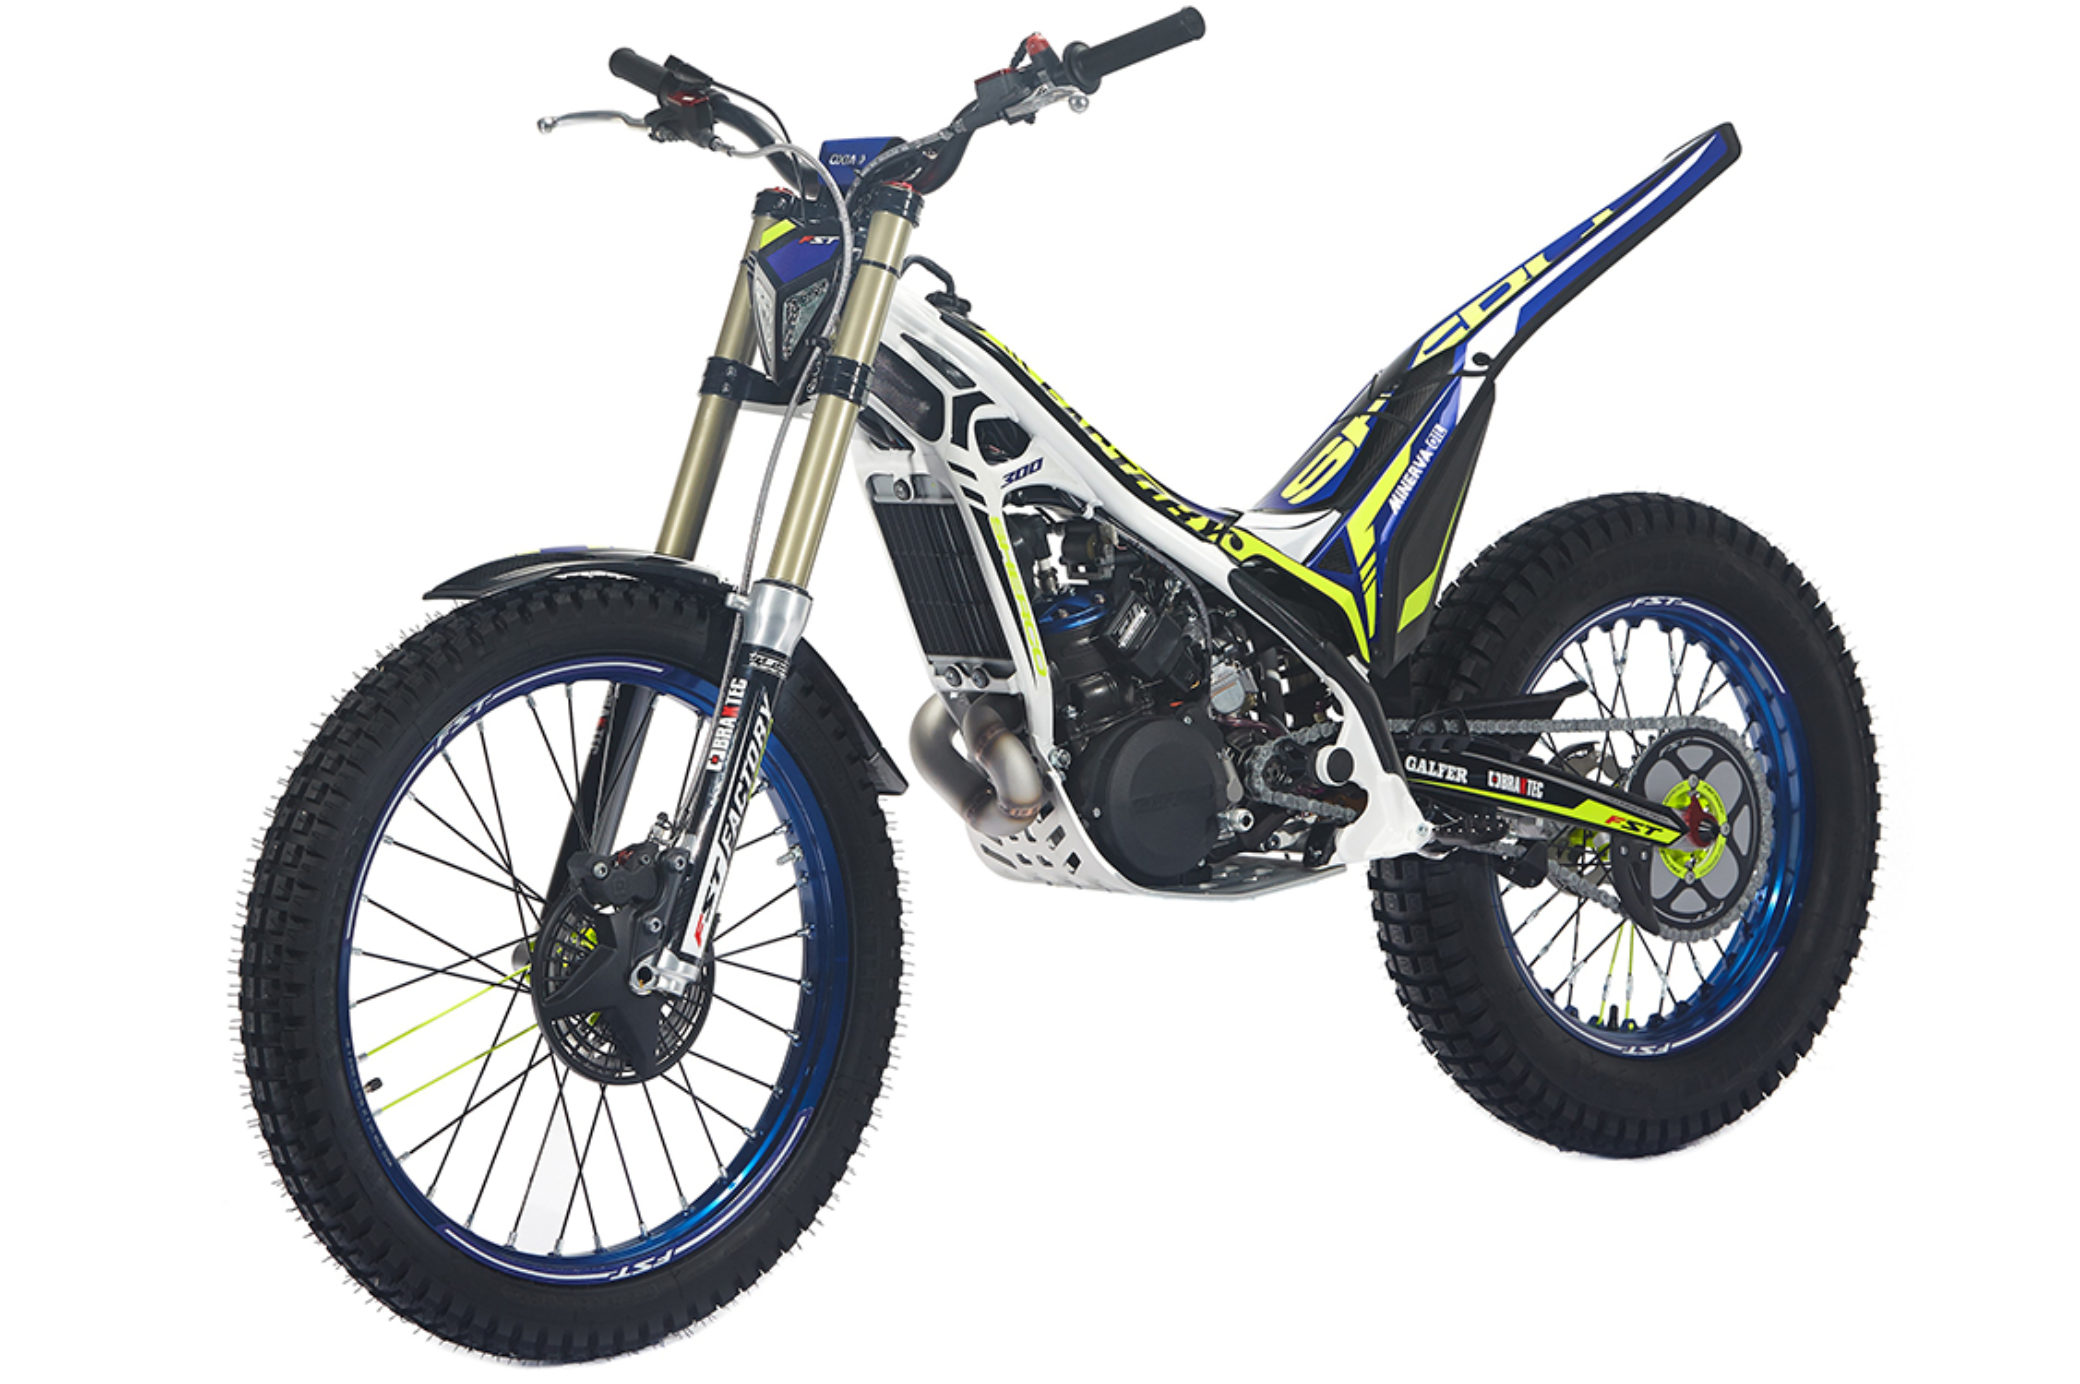 First Look: Sherco Factory trial range